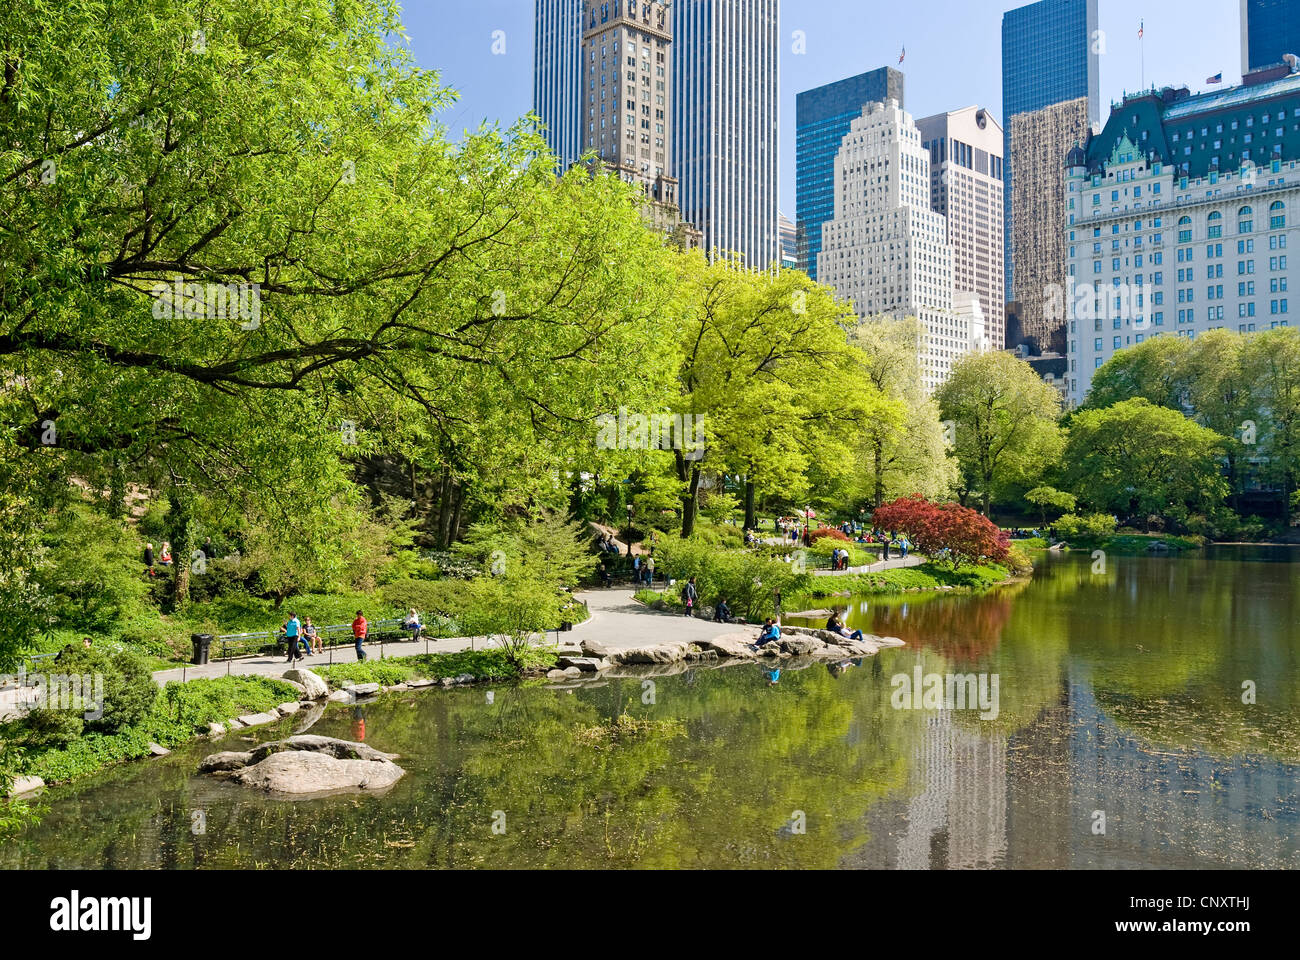 Central Park, New York City in spring season with the Plaza Hotel. Stock Photo